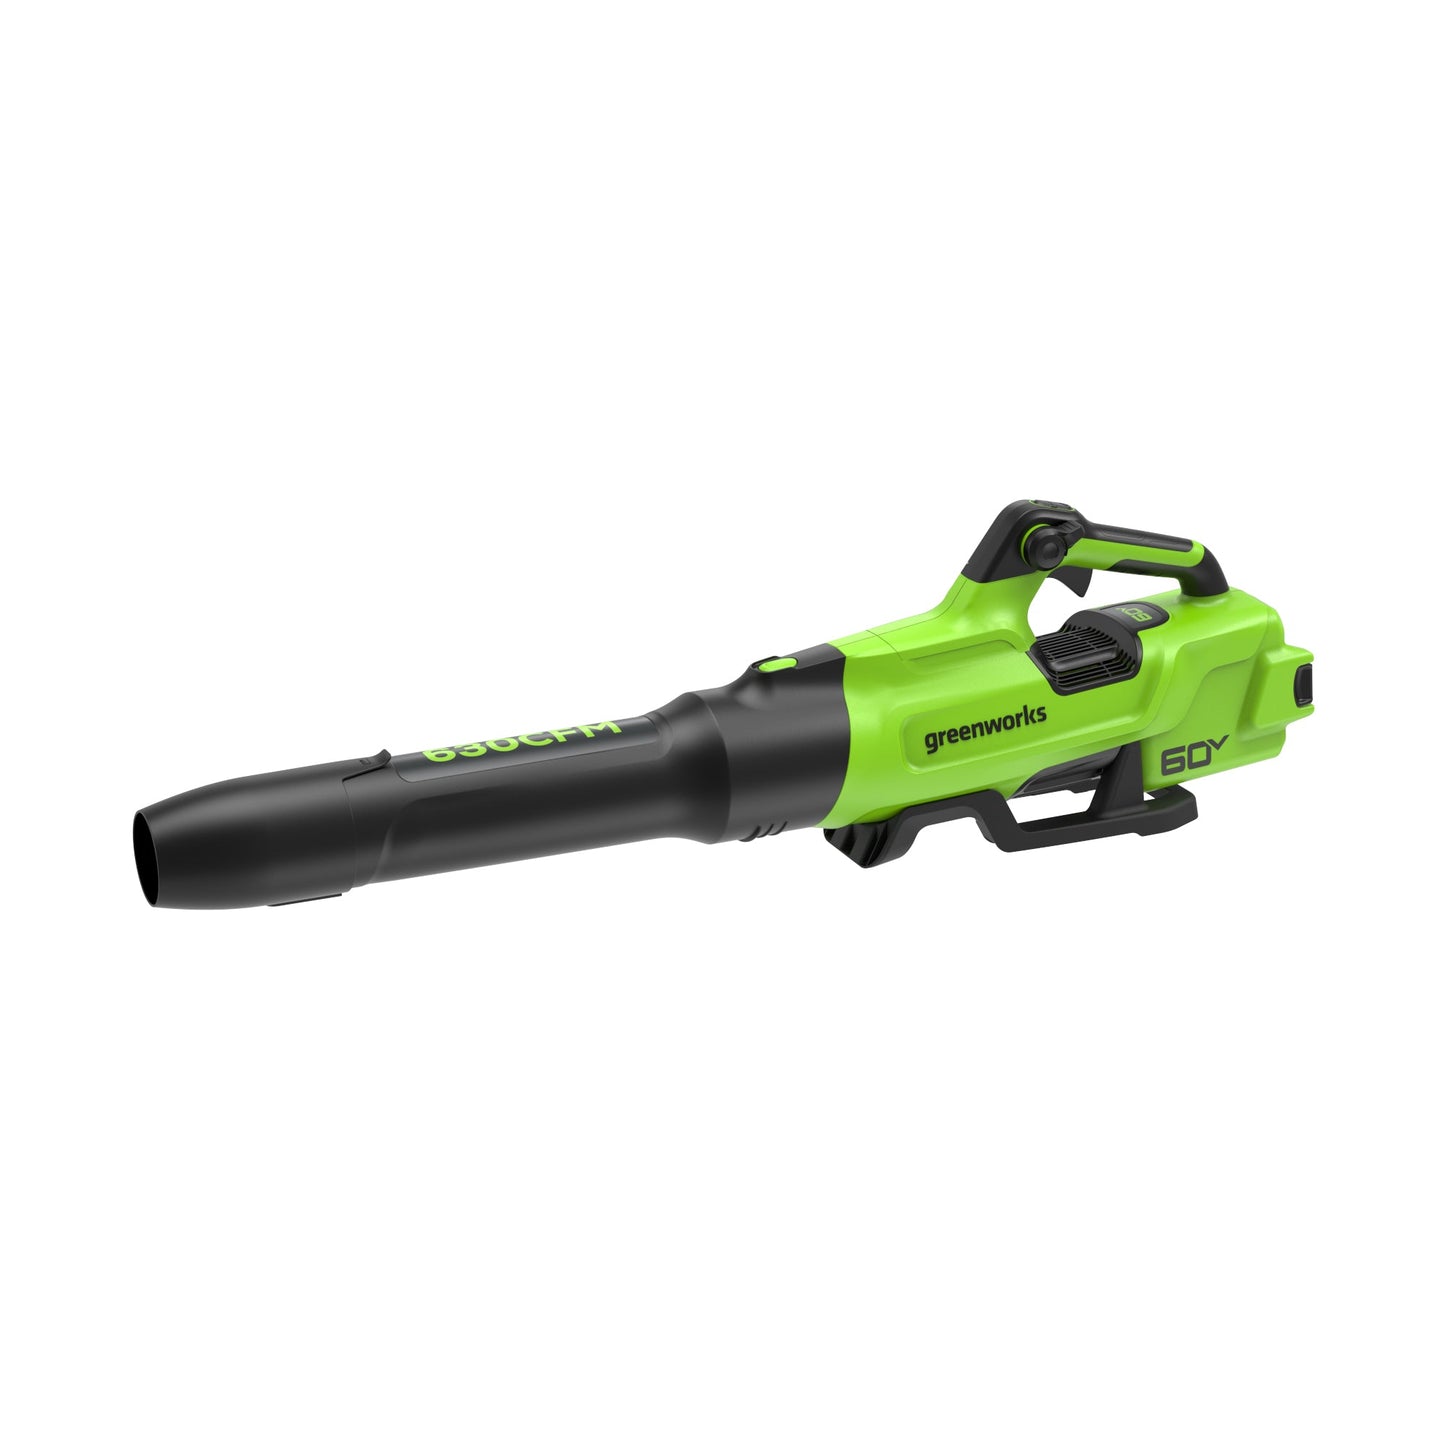 60V 630CFM Cordless Battery Blower w/ 2.5Ah Battery and 3A Charger